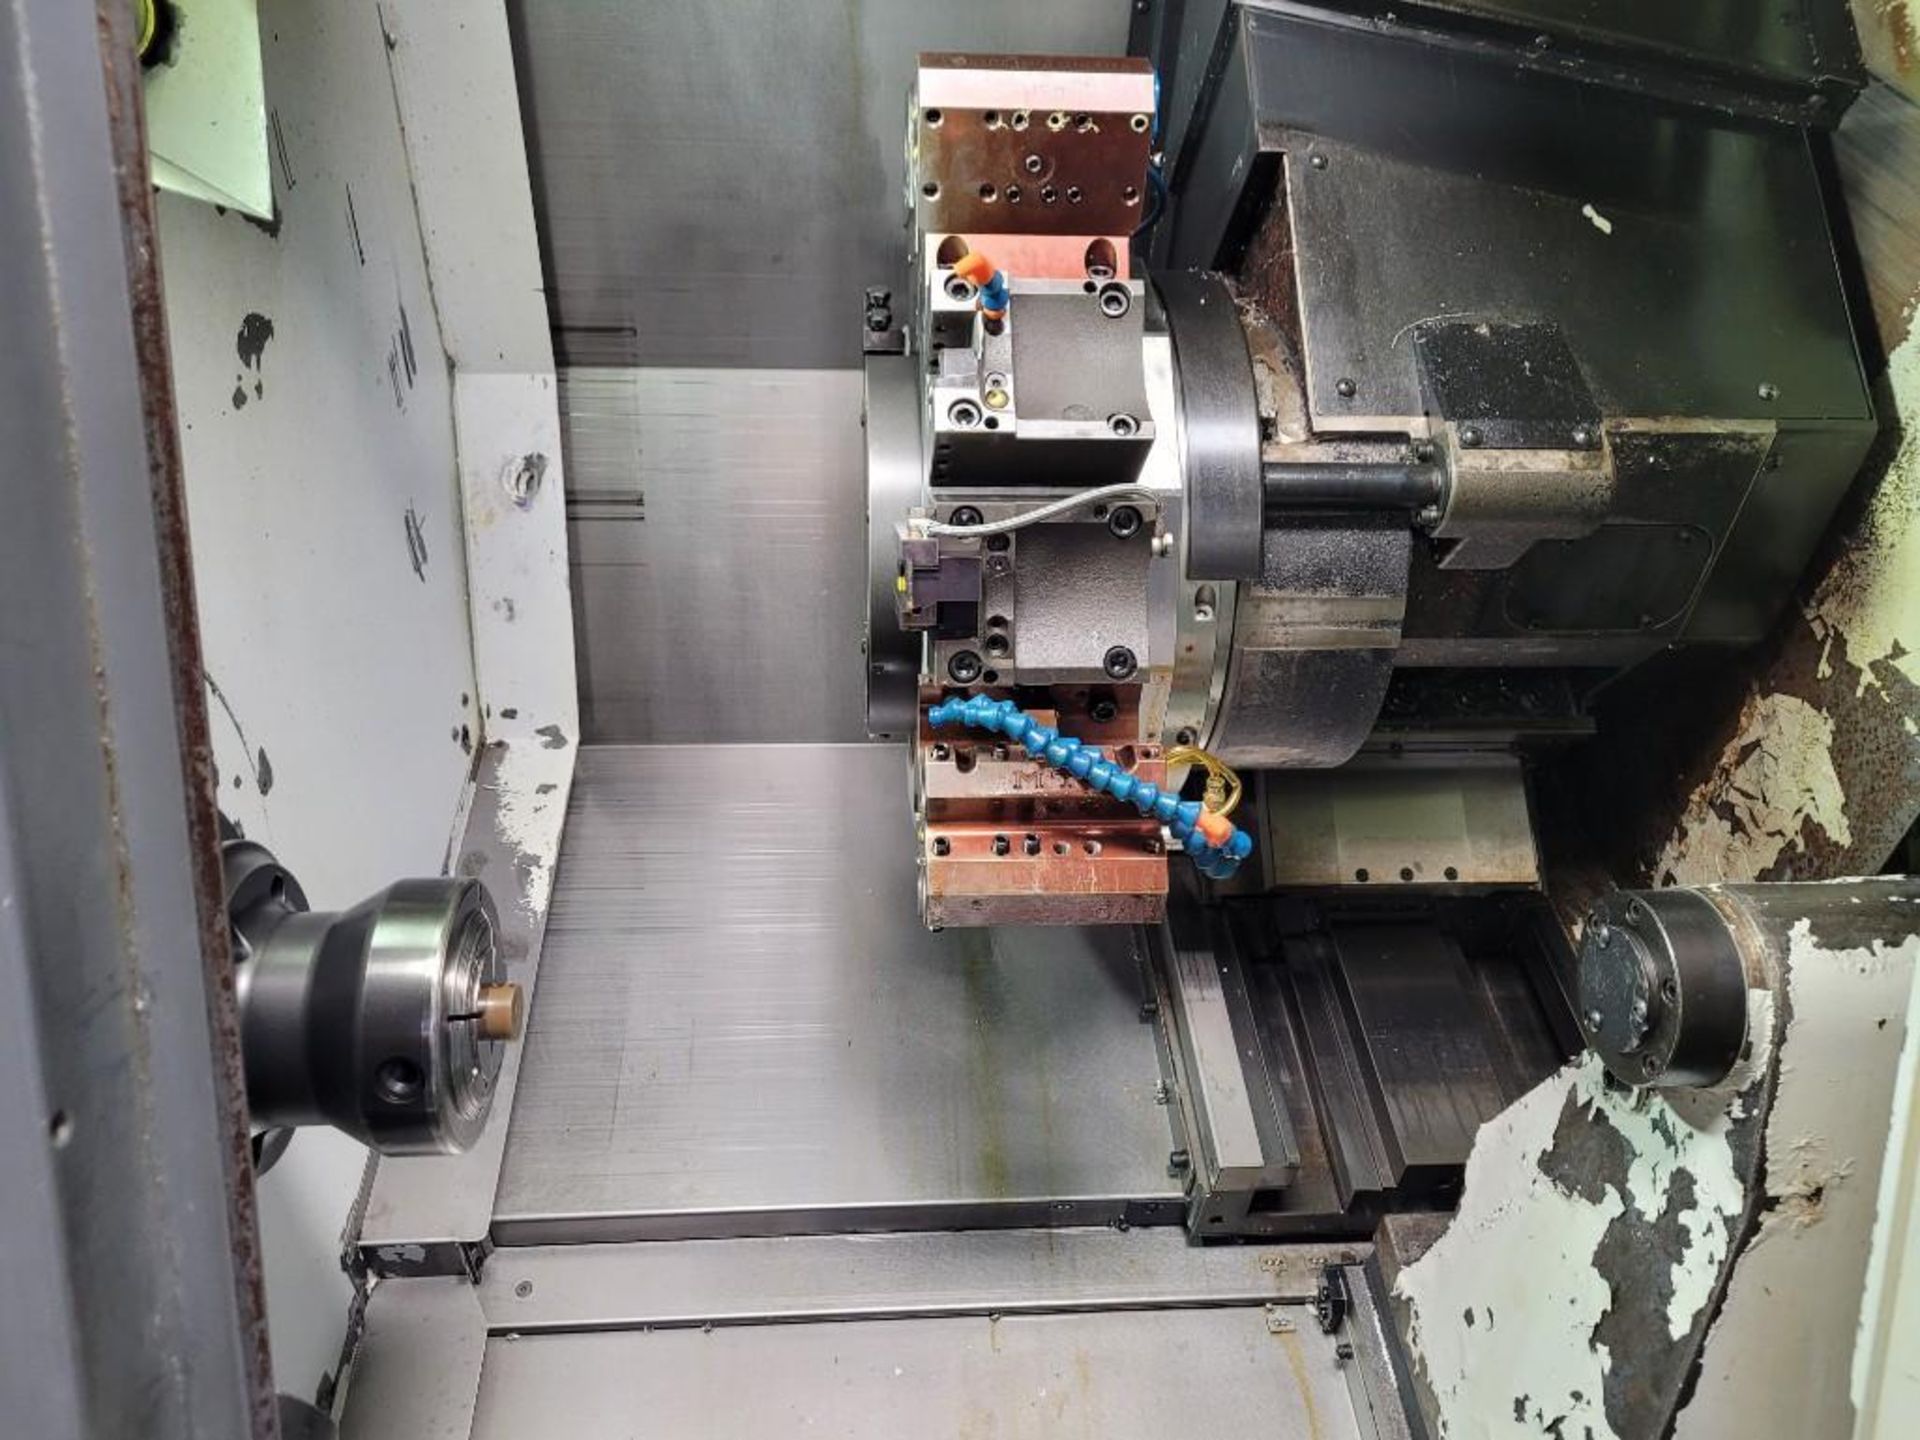 Mori Seiki NL2000Y CNC Turning Center, MSX-850III Control, Y-Axis, Collet Chuck, New 2005 - Image 5 of 13